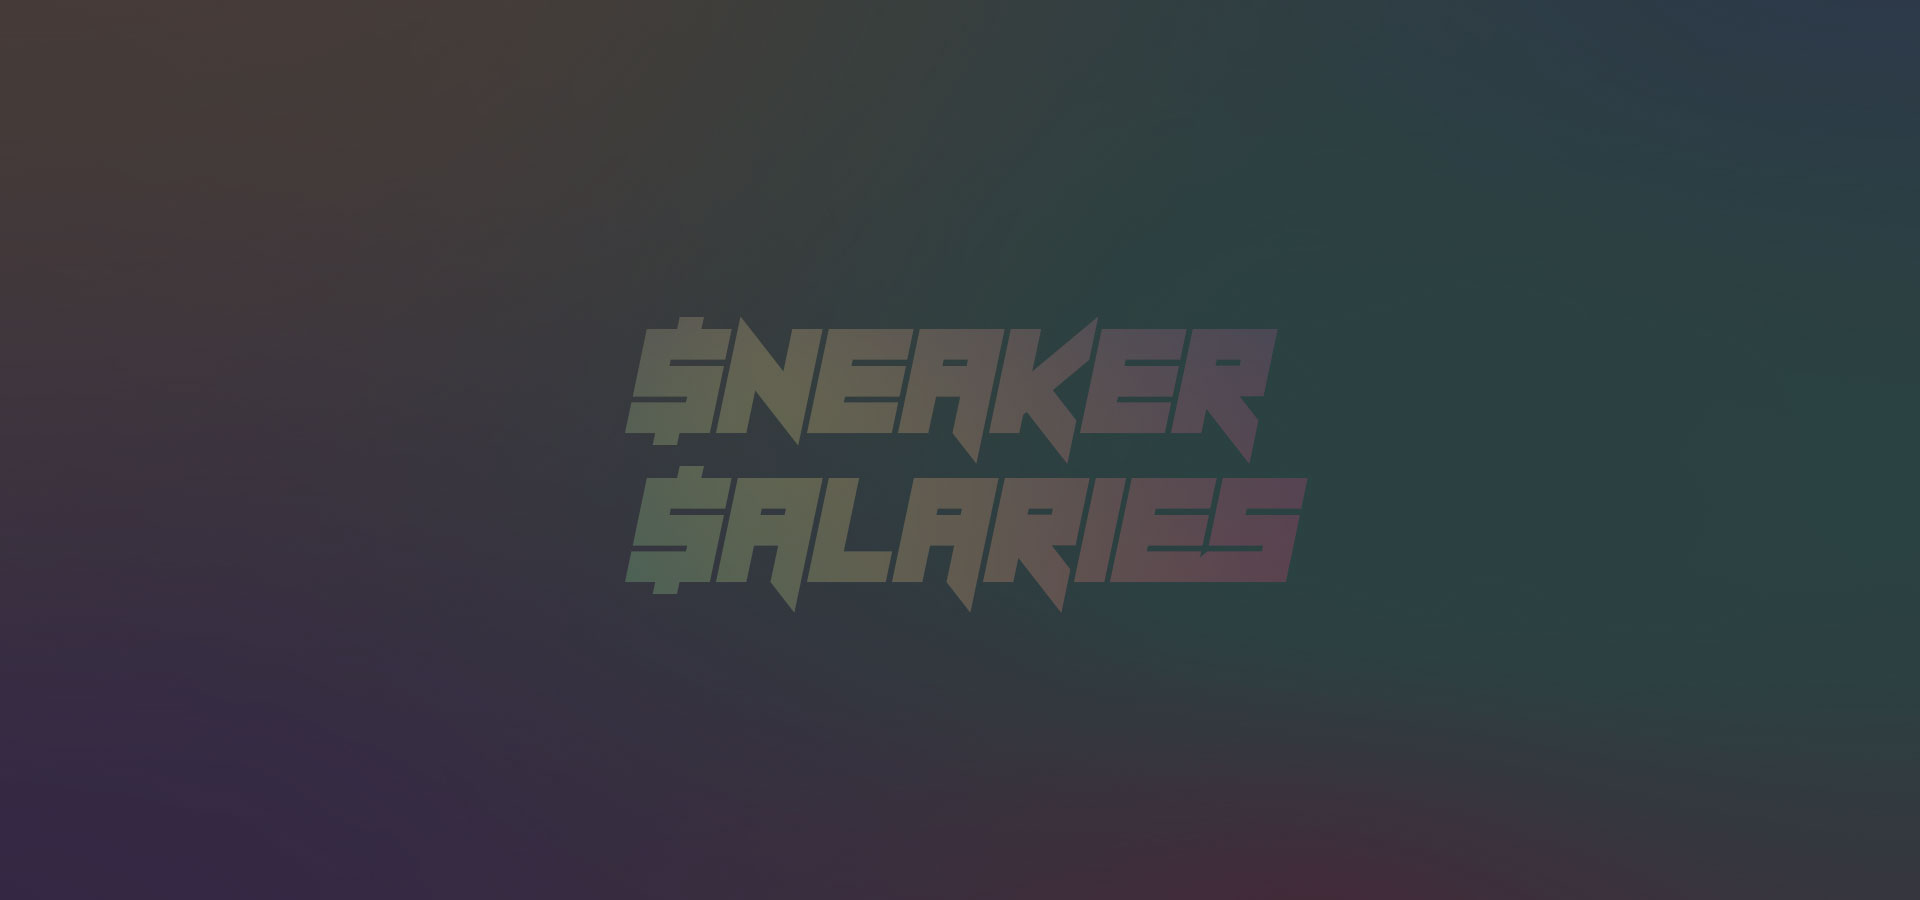 Listen To Our New Podcast, “Sneaker Salaries”